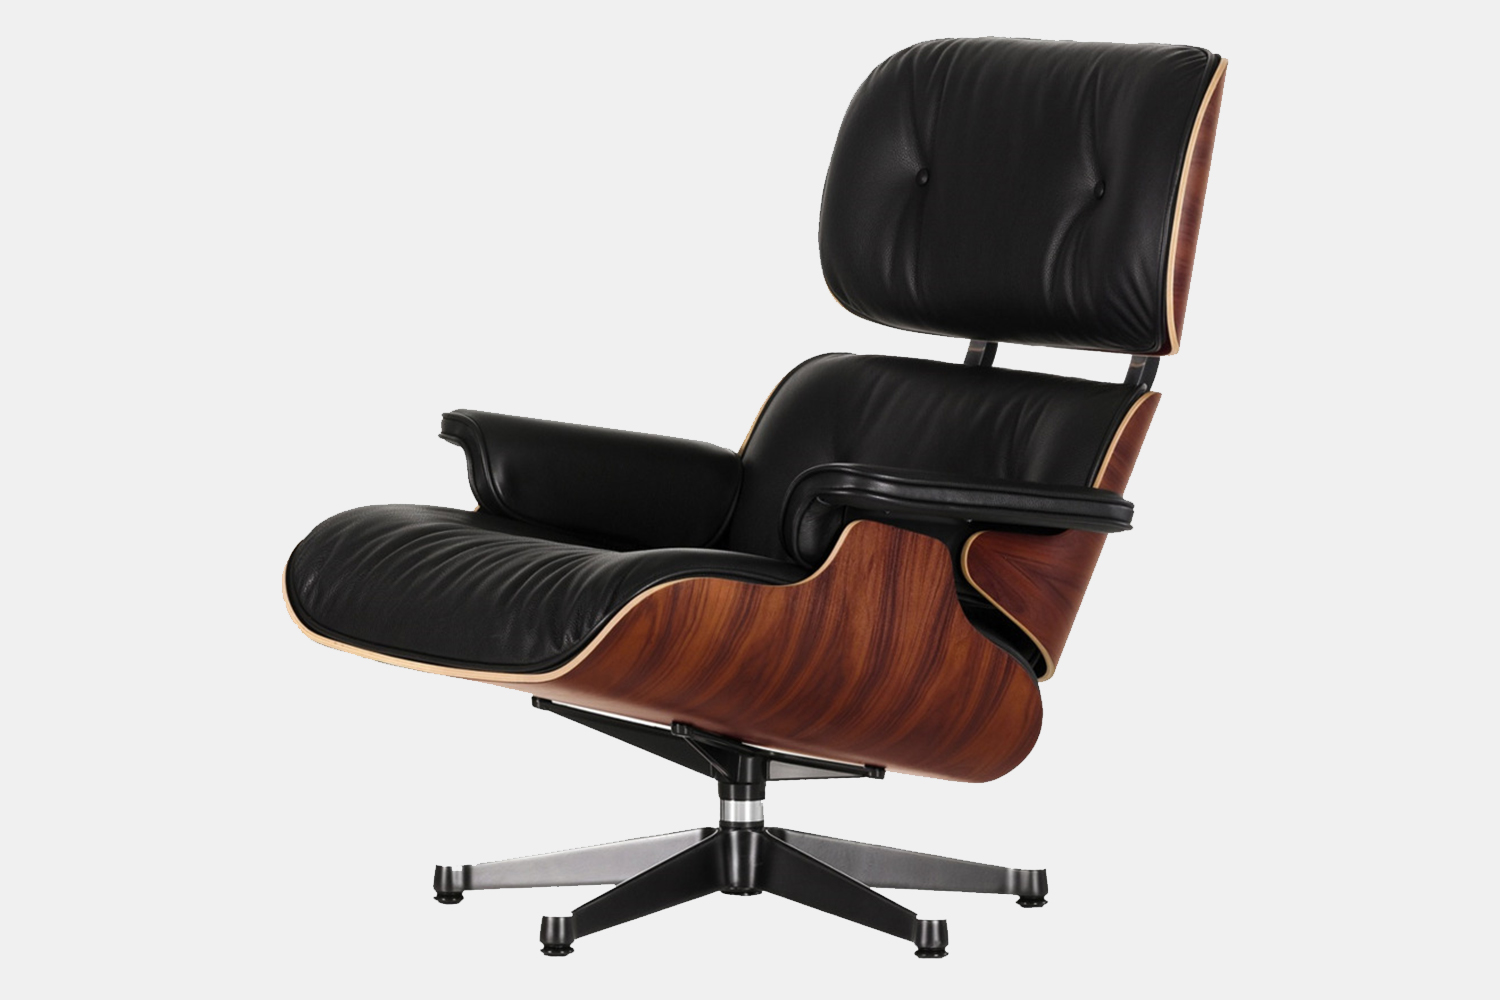  Eames Lounge Chair and Ottoman in leather